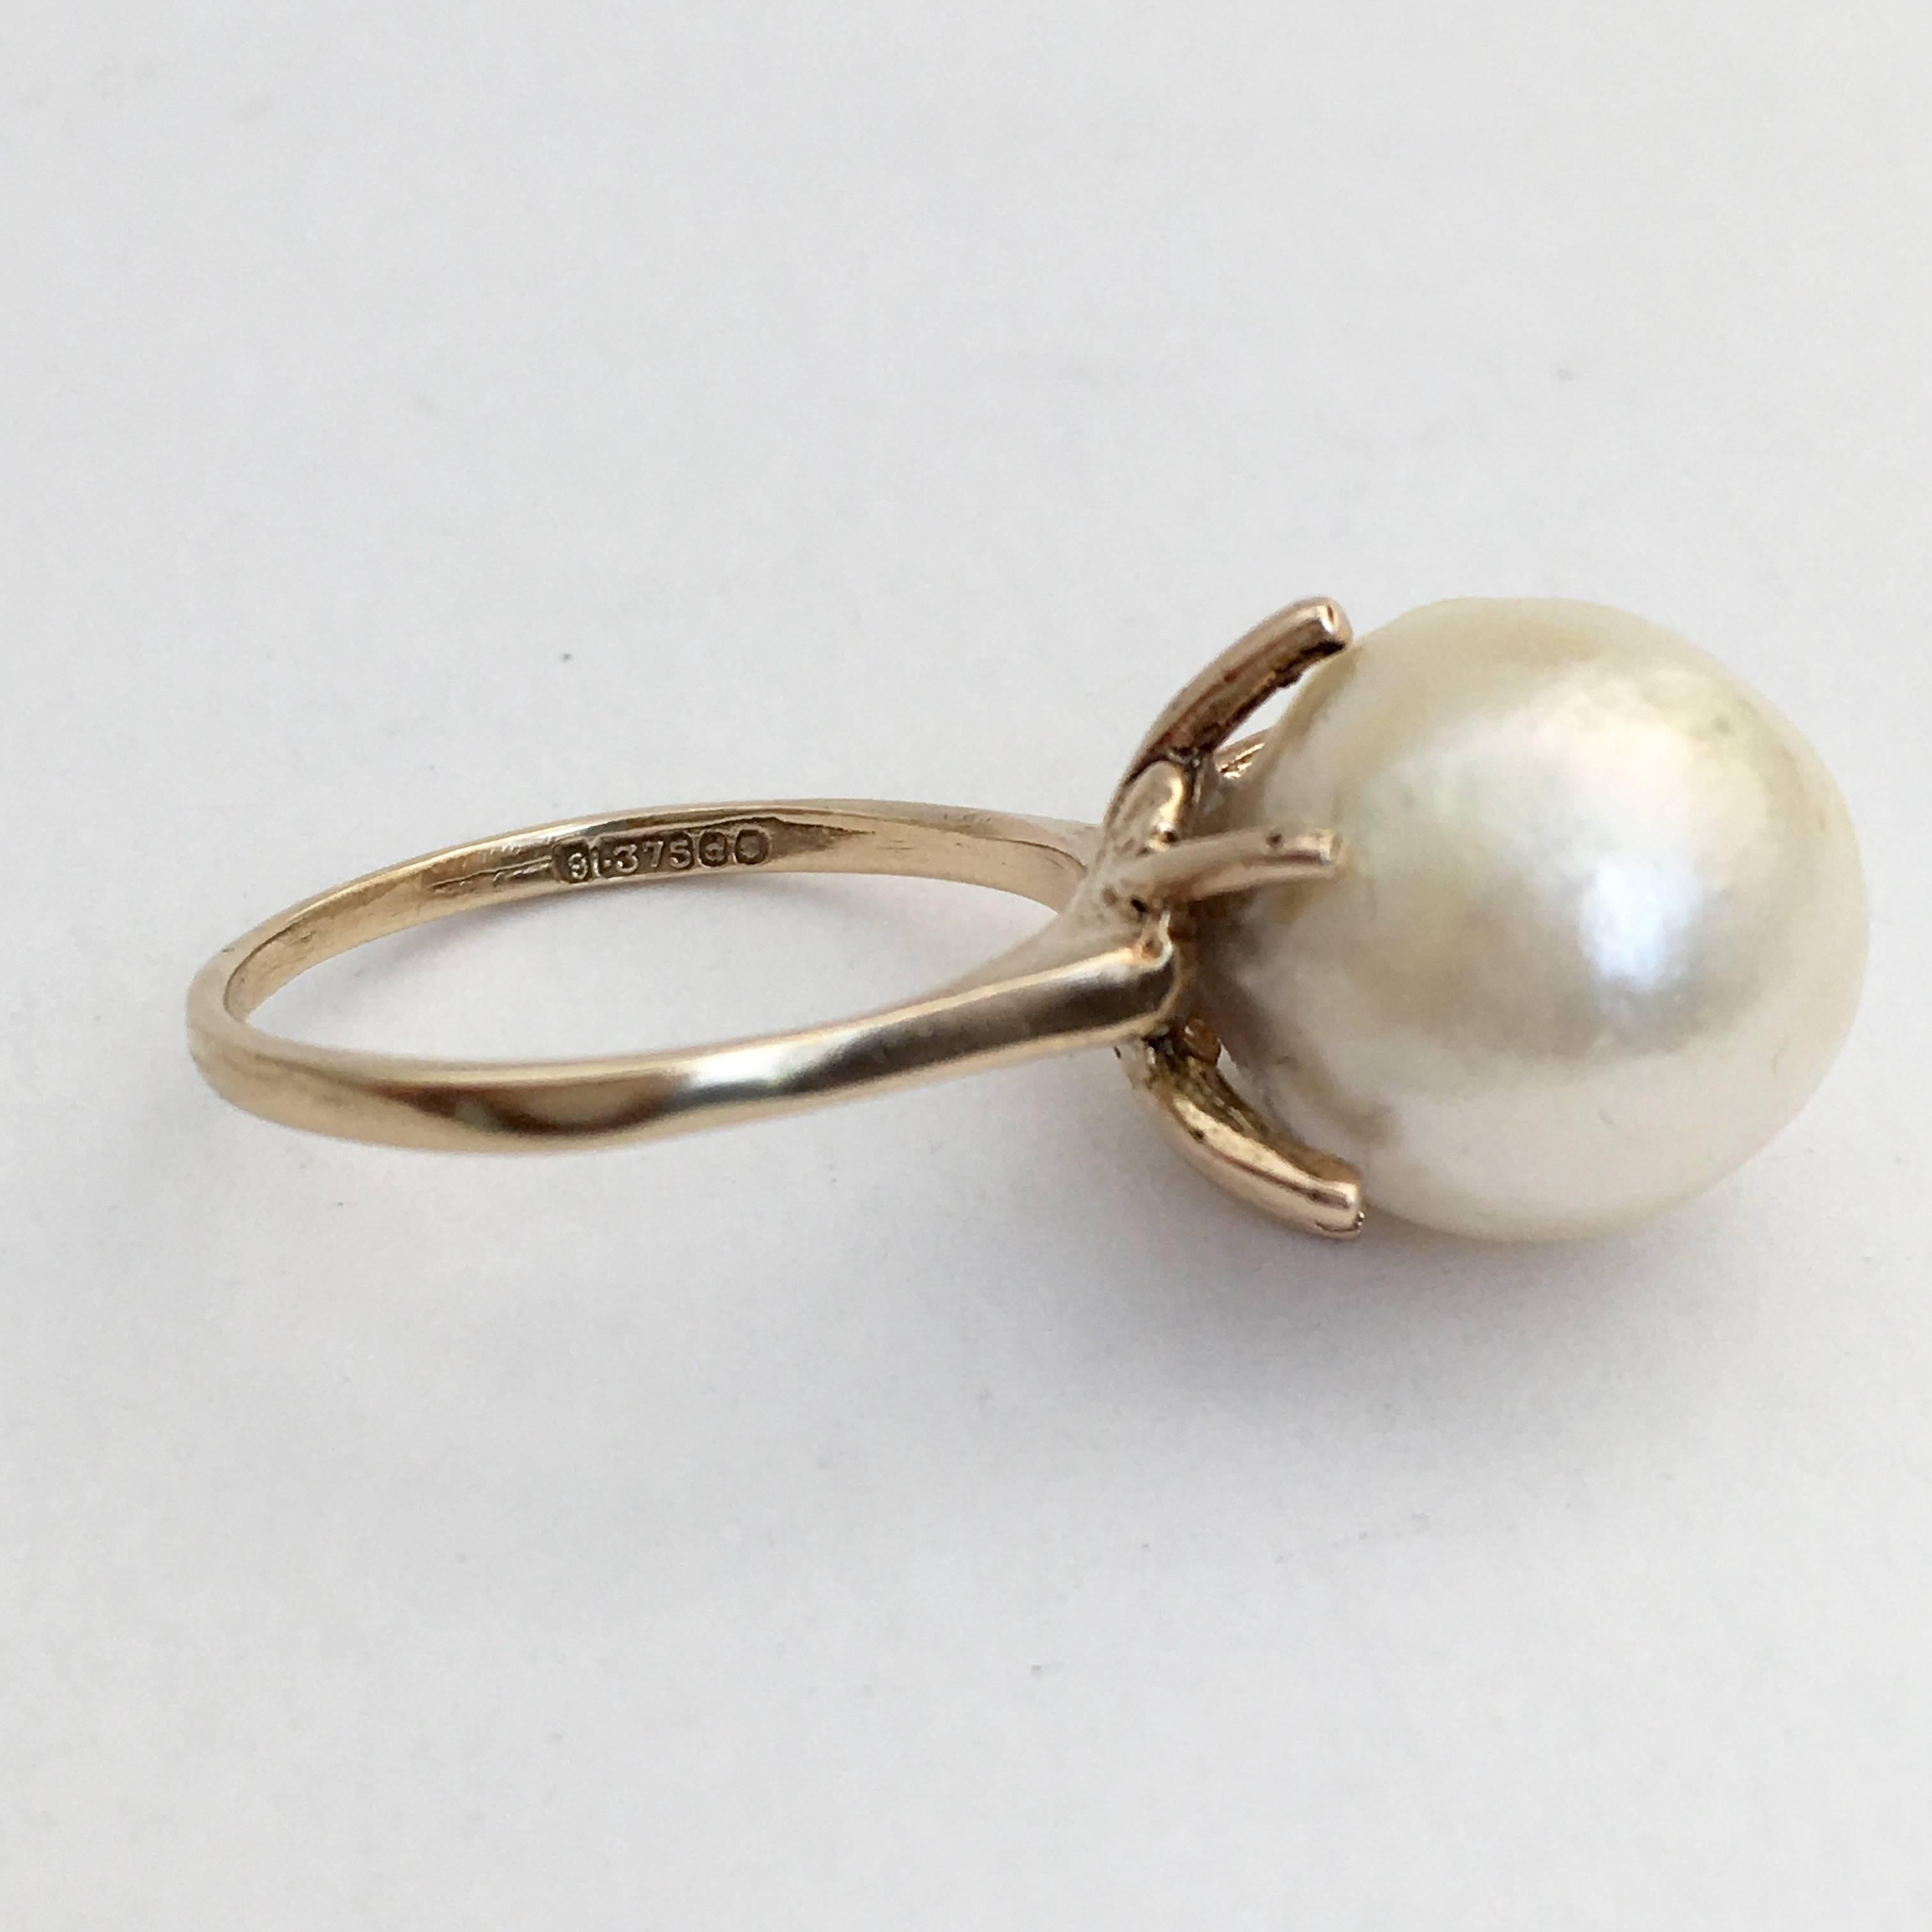 1950s Cocktail Ring Large Baroque Pearl English Midcentury Gold Vintage Jewelry For Sale 2